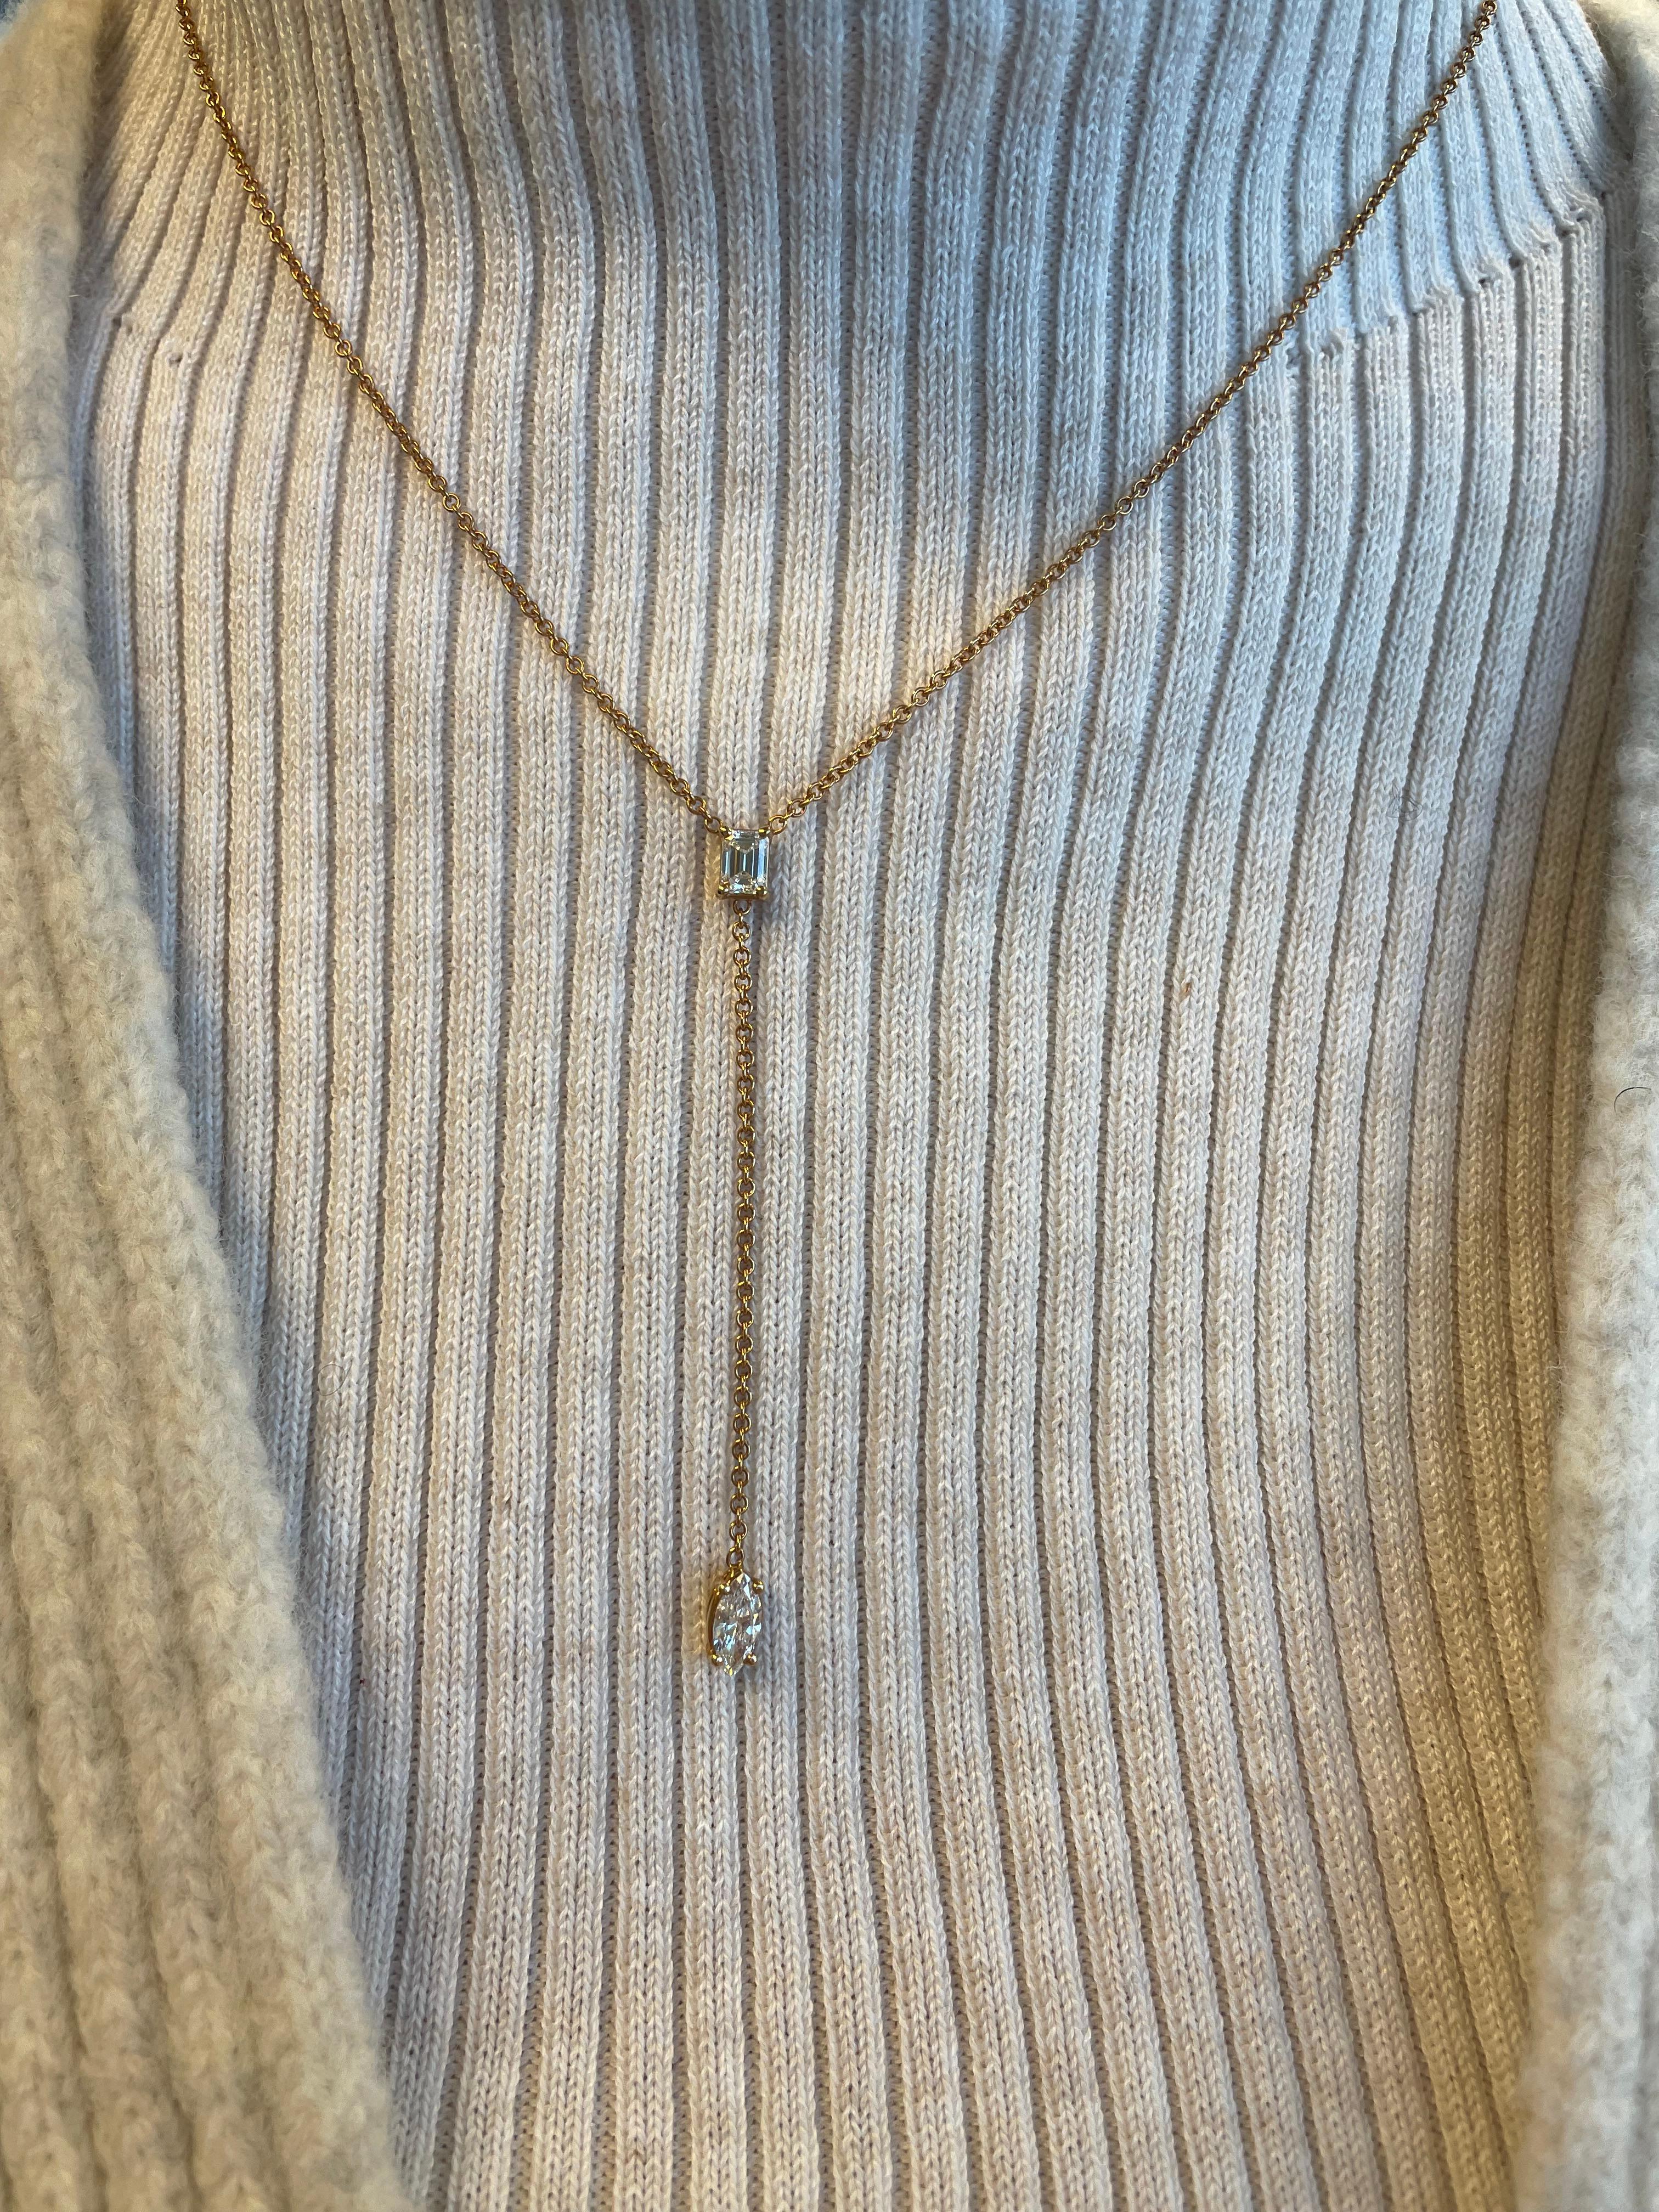 Exquisite double pear drop diamond necklace. By Alexander Beverly Hills.
2 emerald cut diamonds, 0.83 carats total. Approximately G/H color and VS clarity. Prong set in 18k rose gold, 4.31 grams. 
Accommodated with an up to date appraisal by a GIA